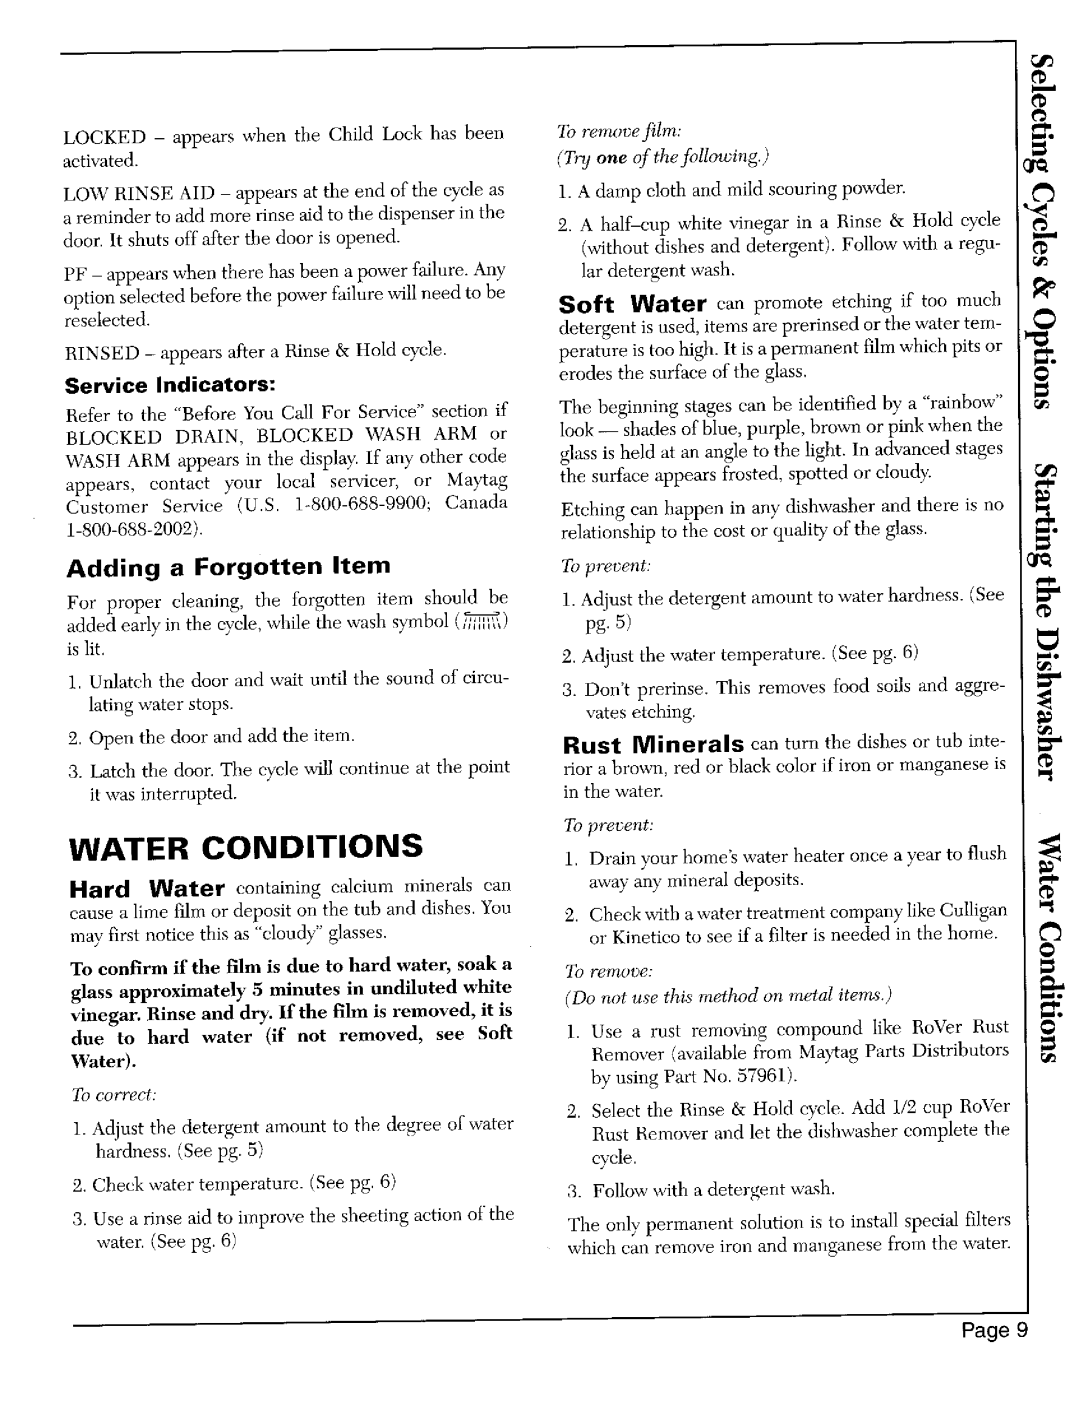 Maytag 9962 warranty Water Conditions, Adding a Forgotten Item, Service Indicators, Page, Soft 